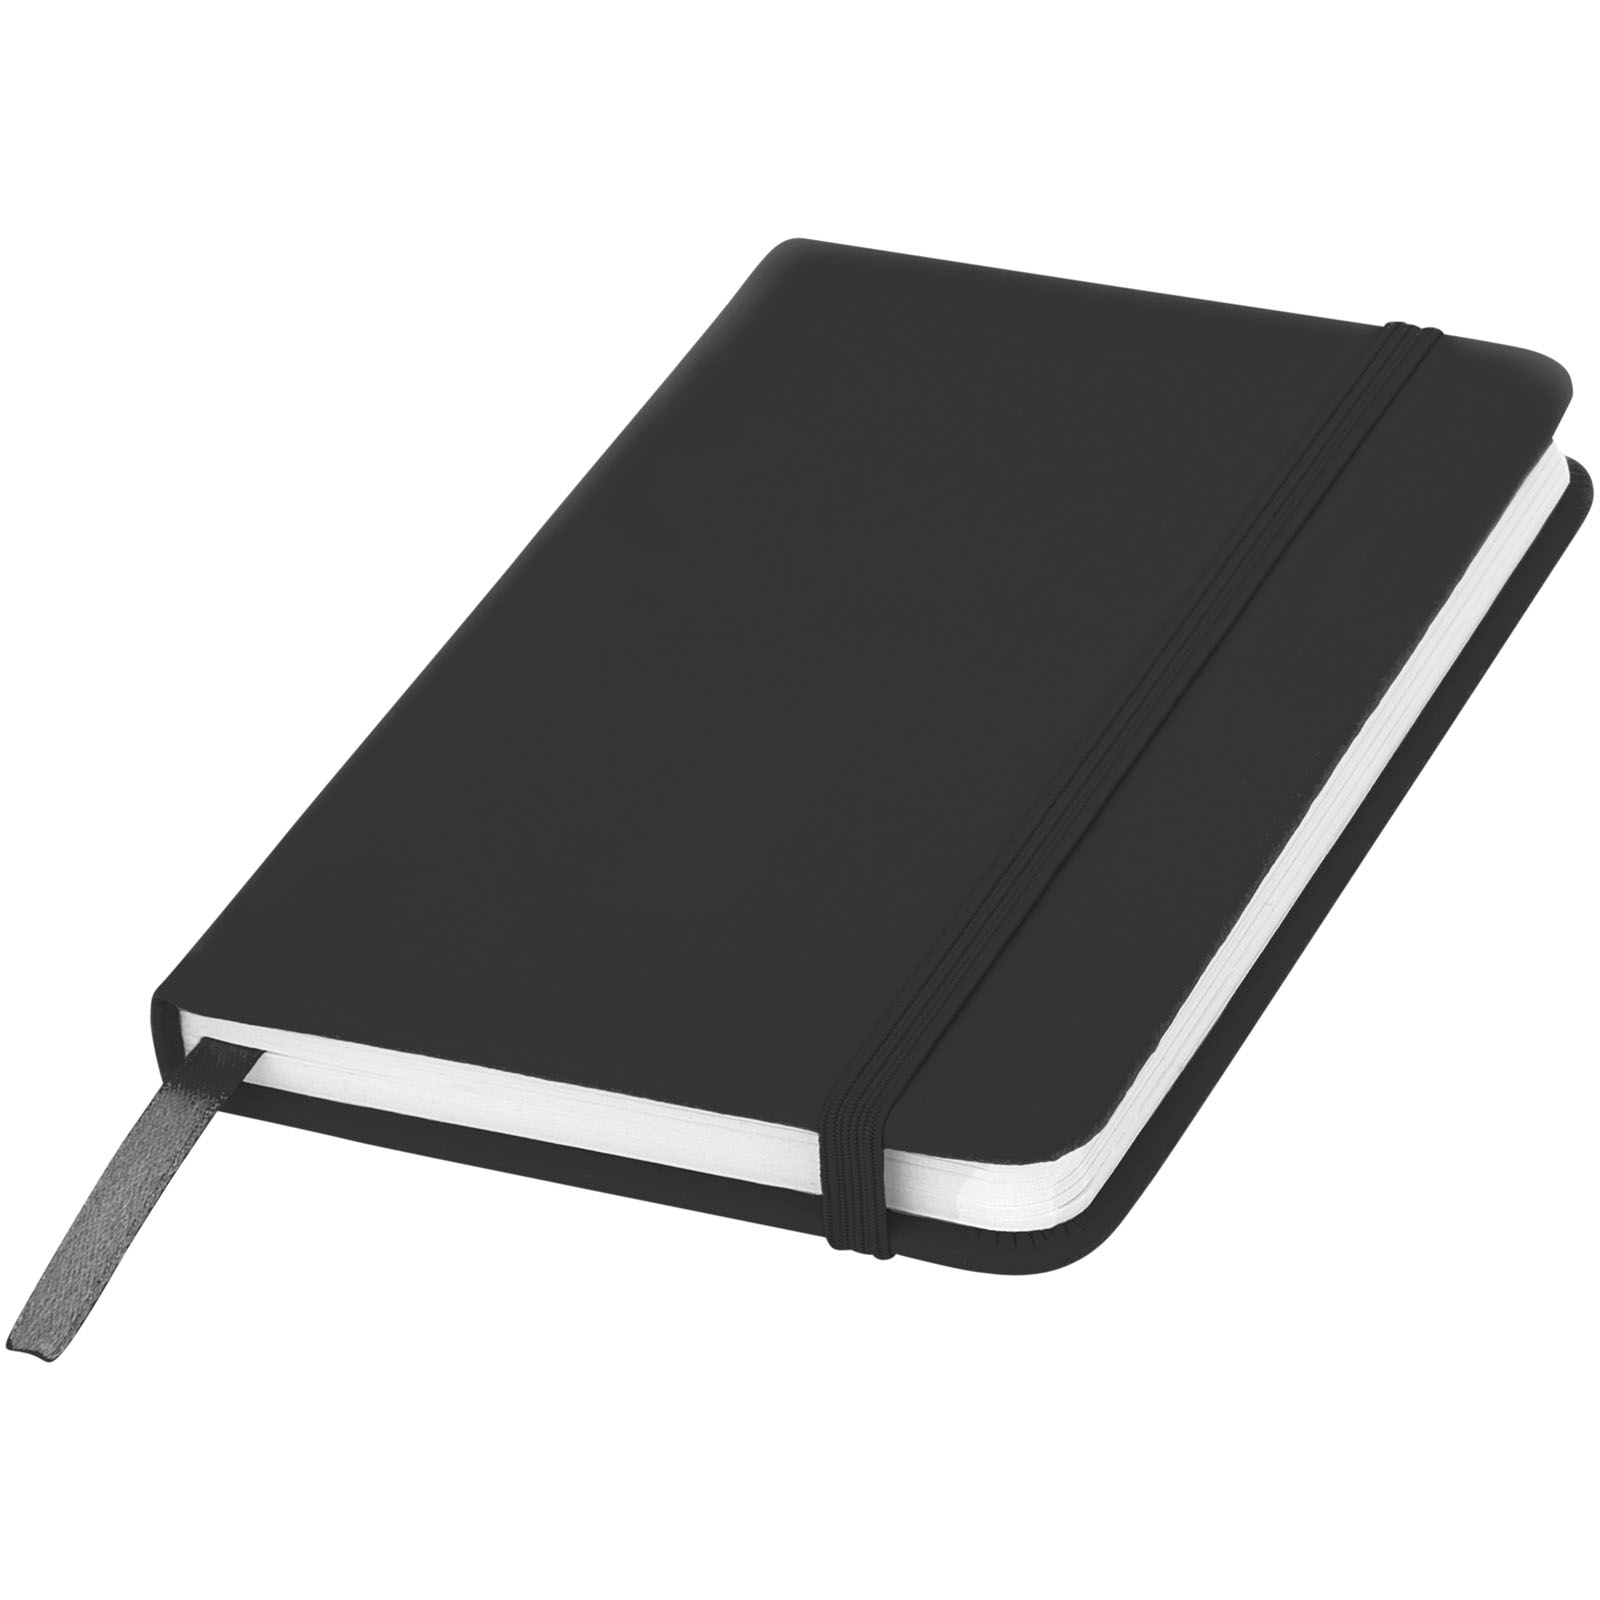 Hard cover notebooks - Spectrum A6 hard cover notebook